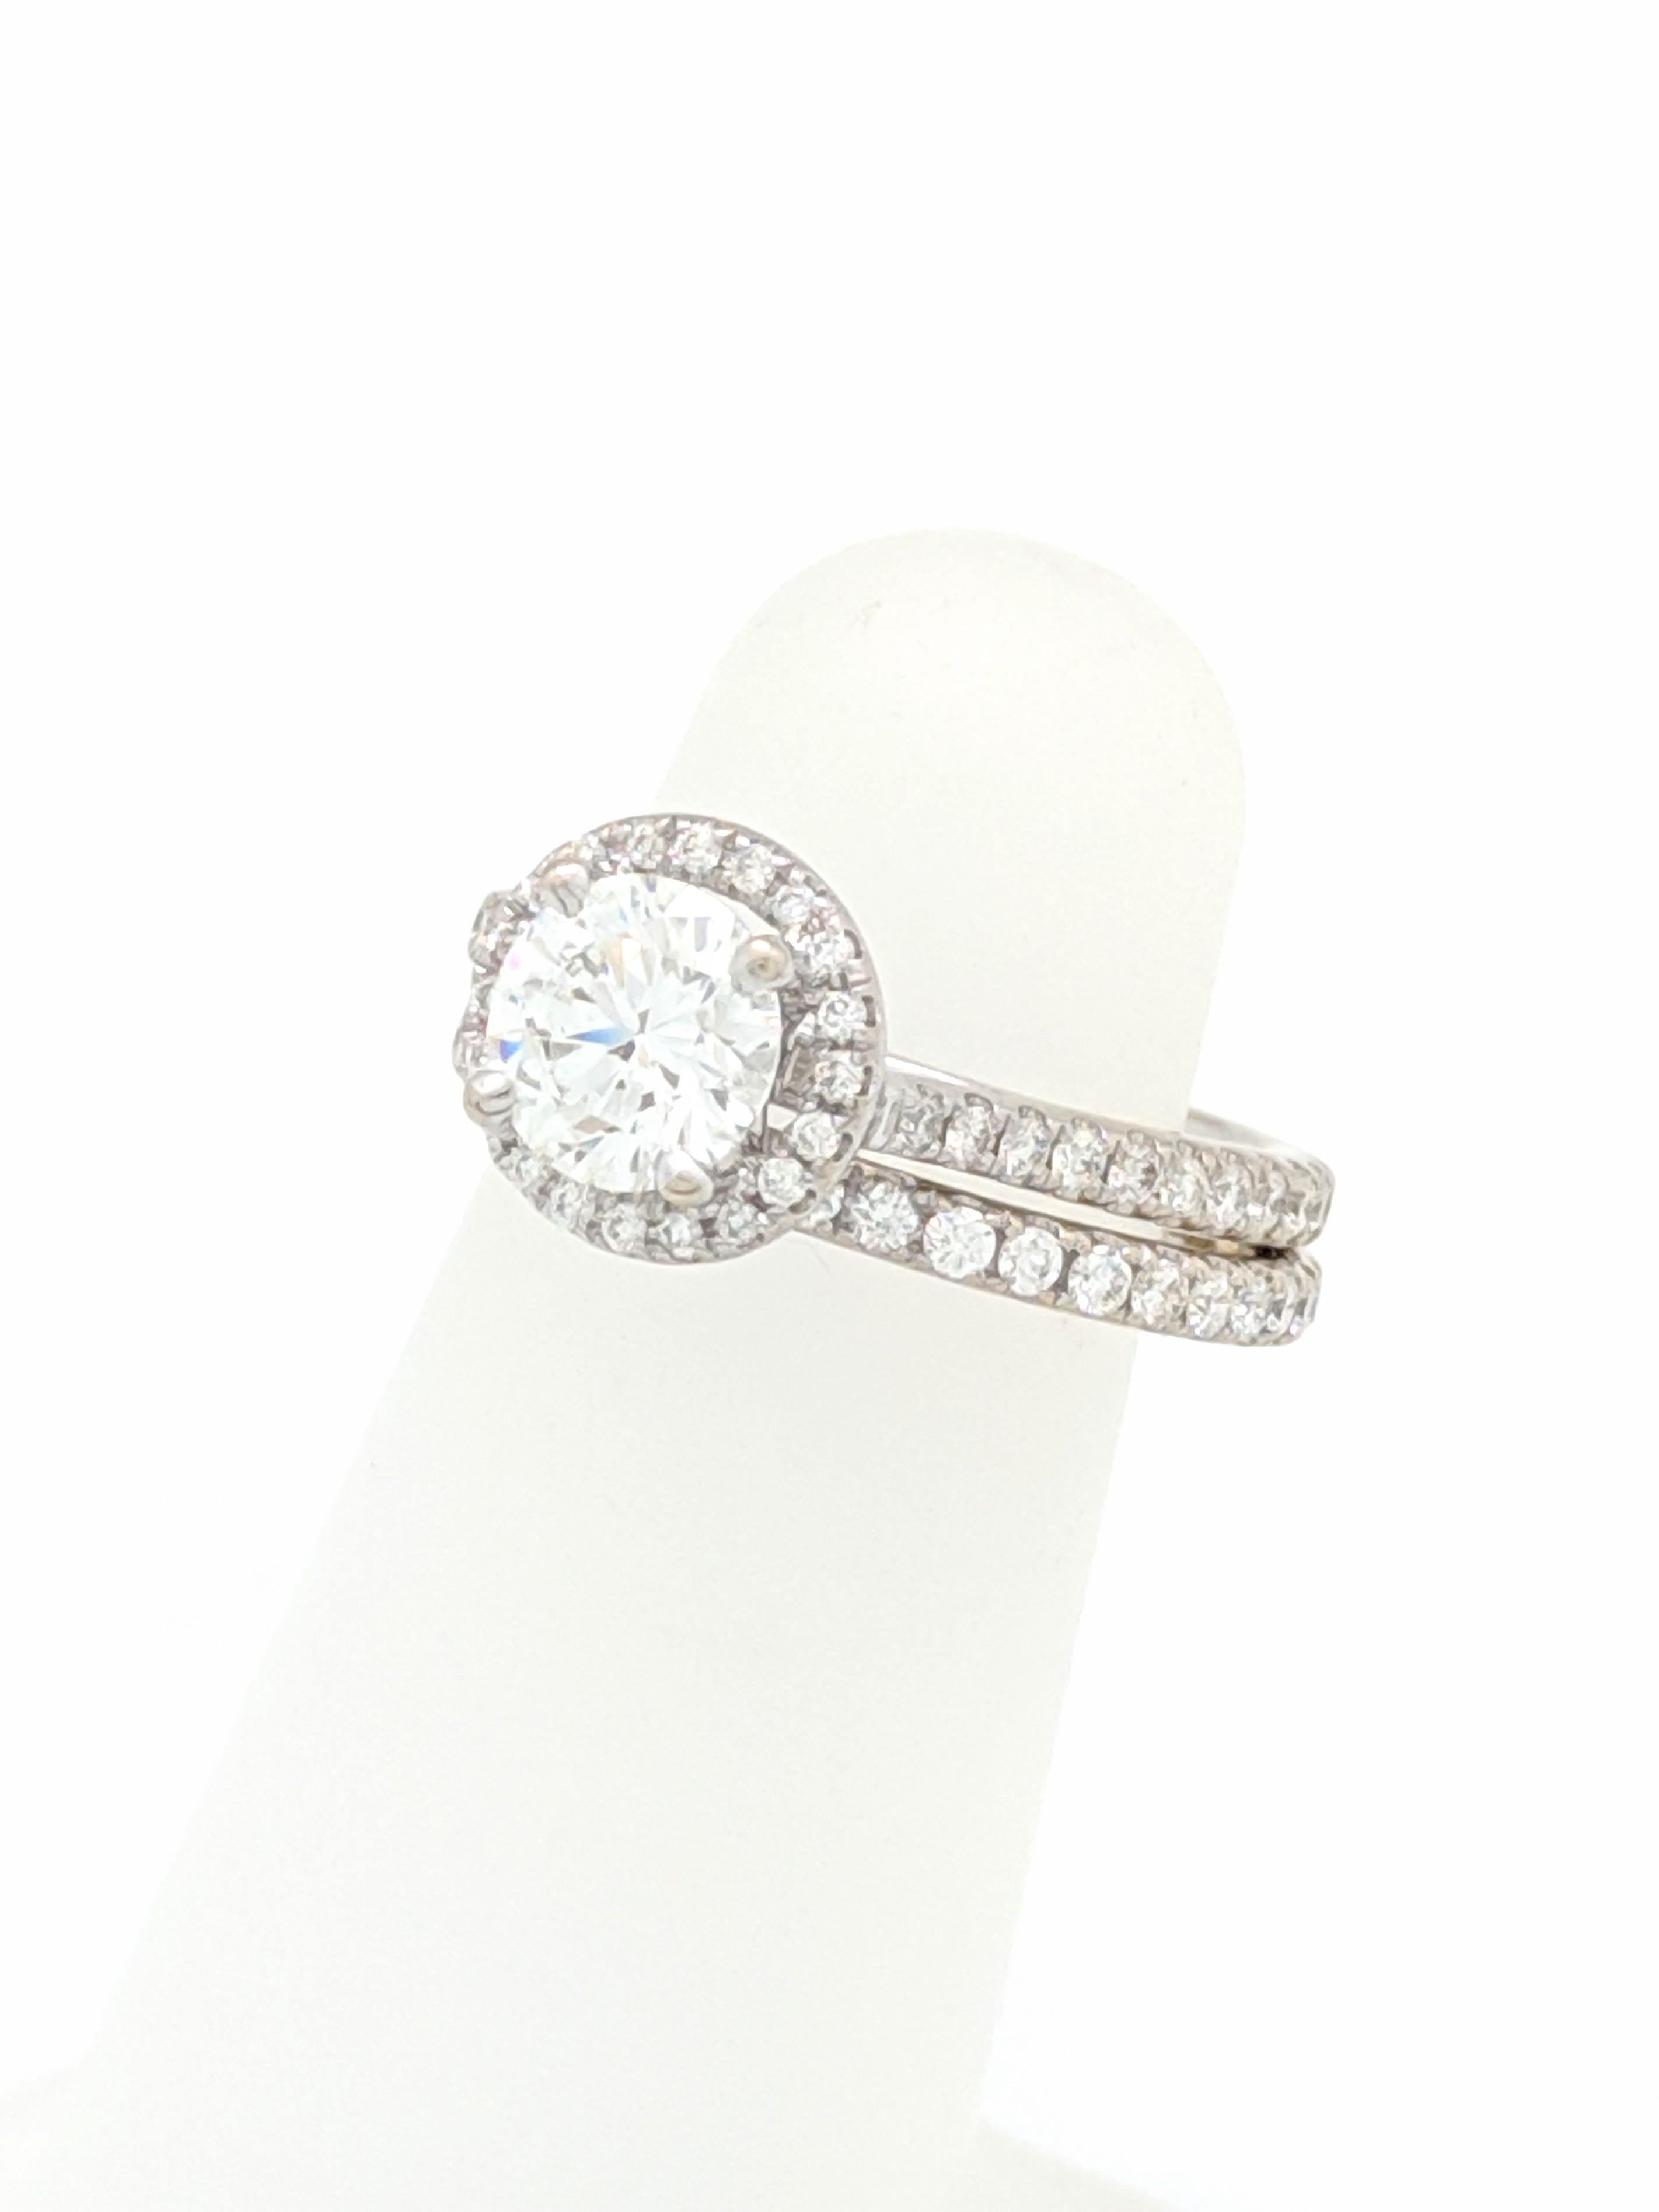 Contemporary .96 Carat Round Brilliant Cut Natural Diamond Ring GIA Certified SI1/F For Sale